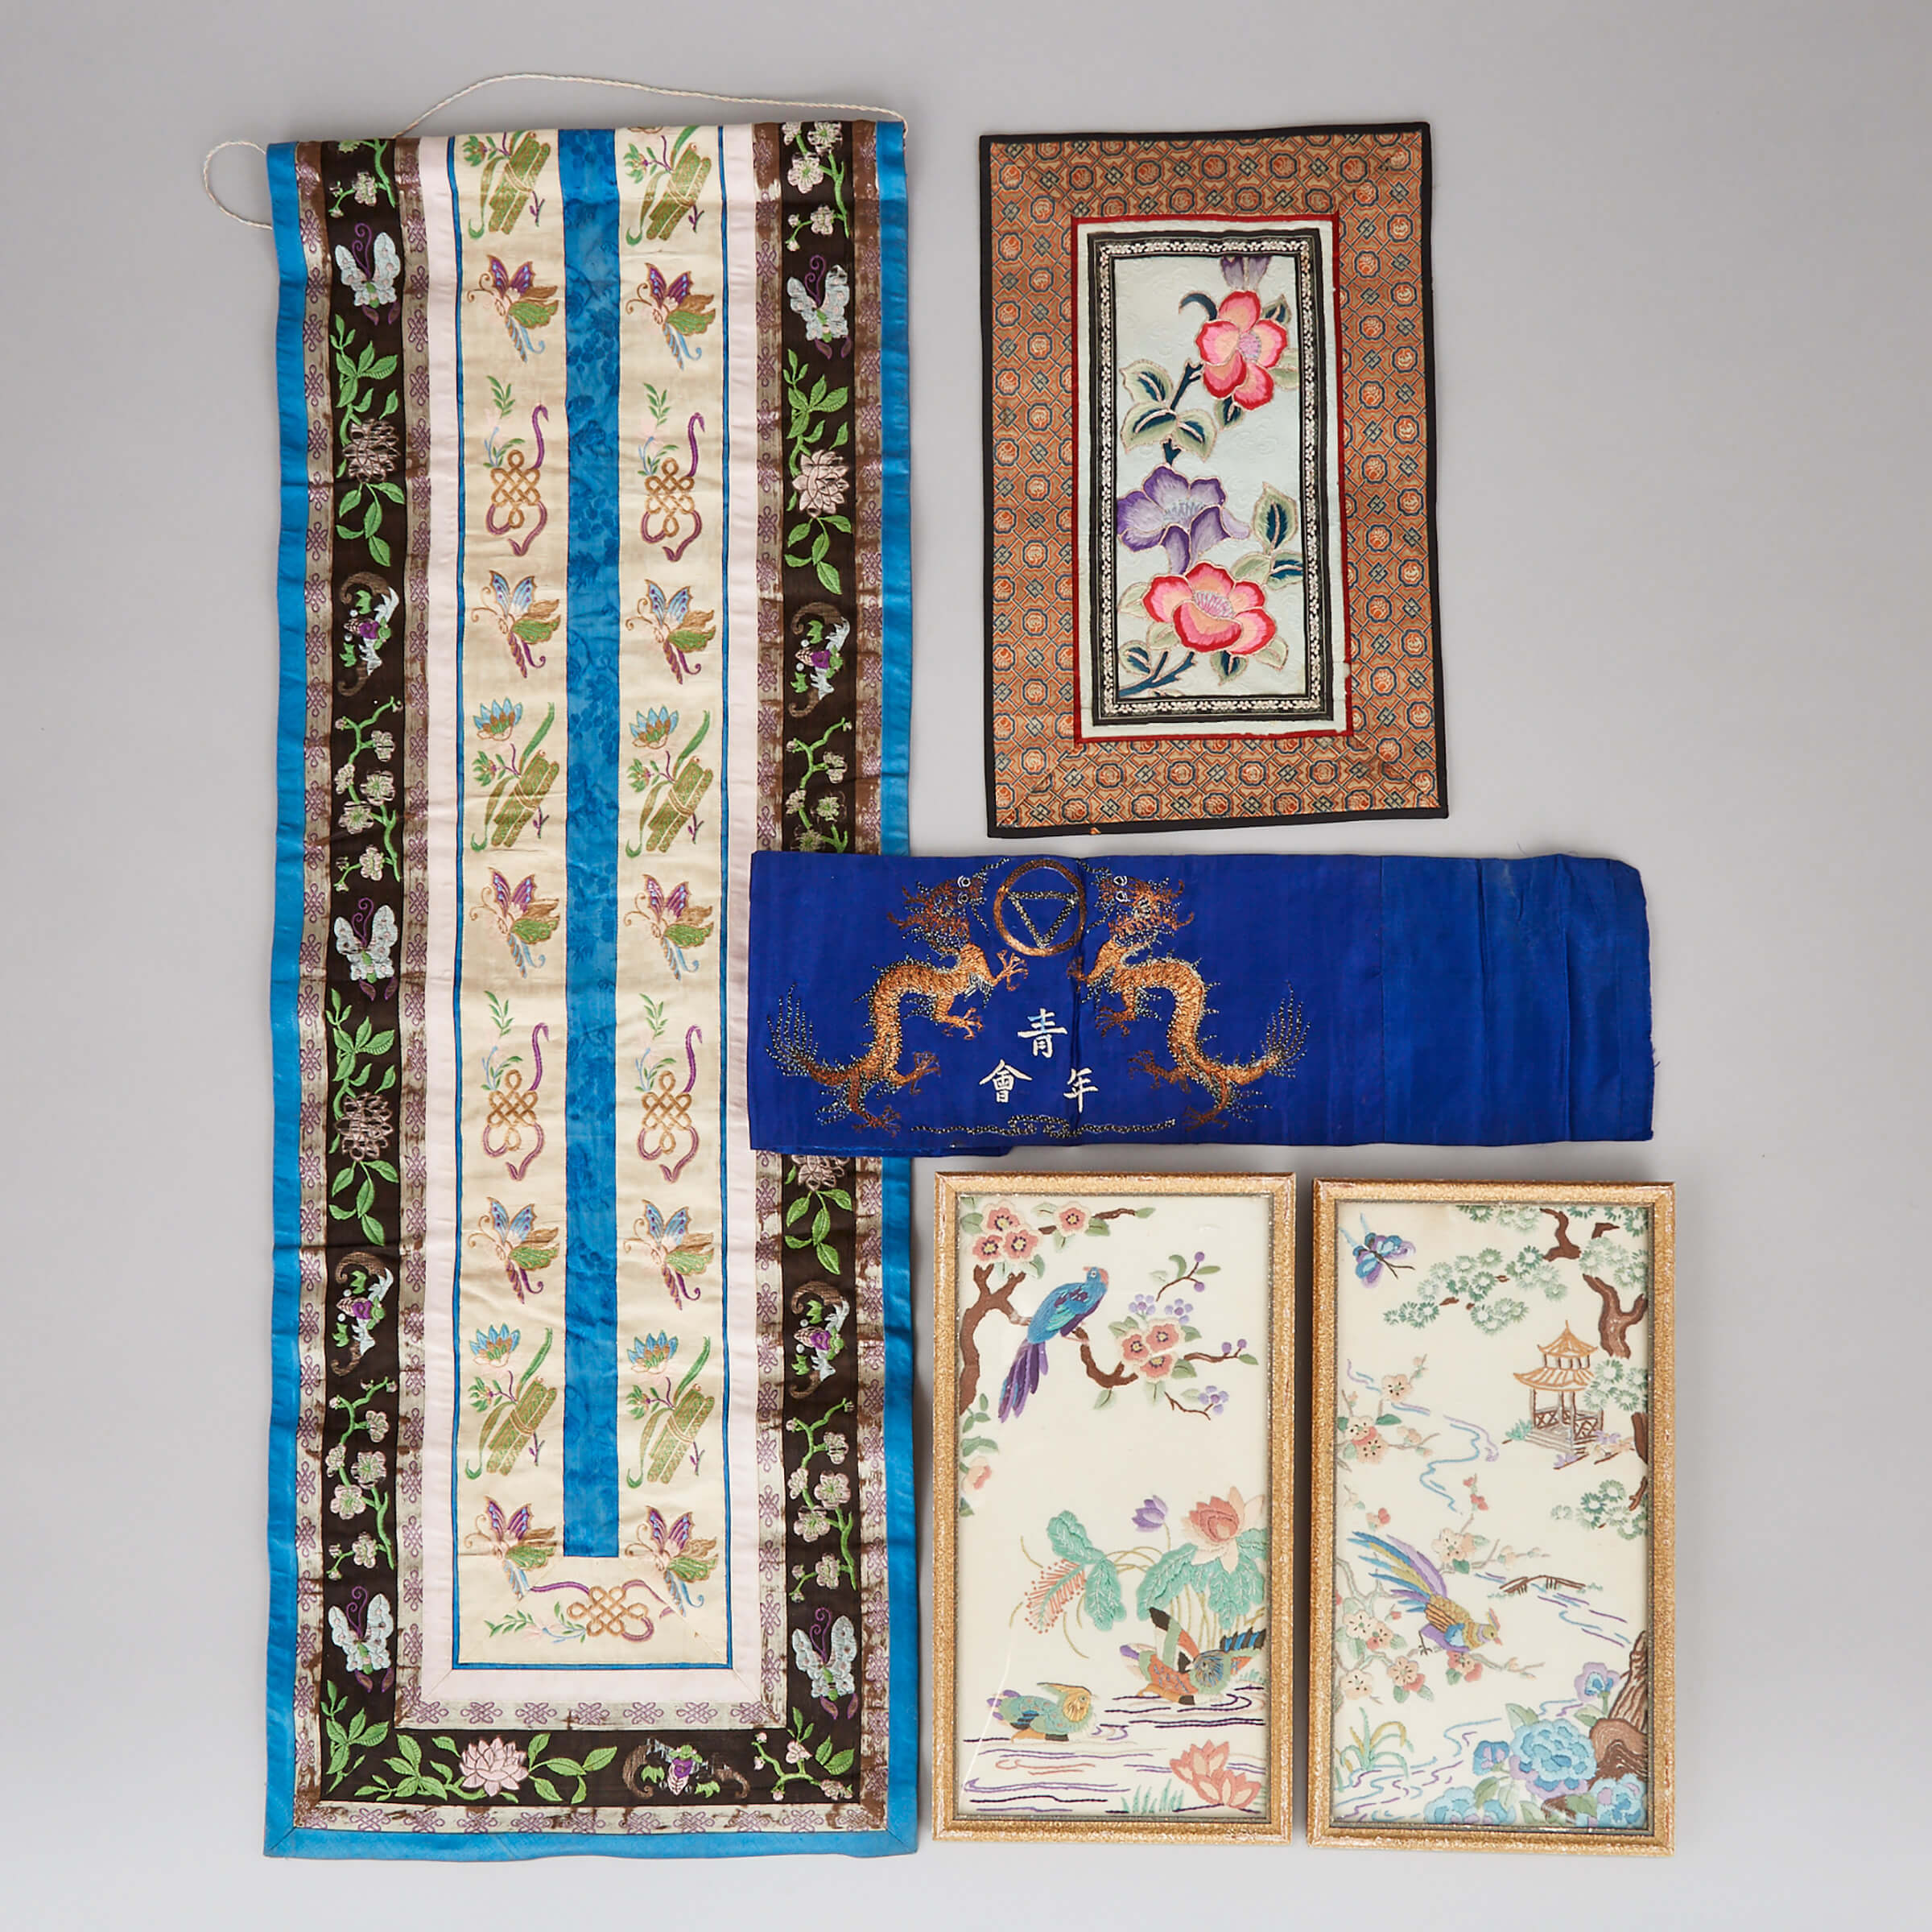 A Group of Five Chinese Embroideries, 19th/20th Century